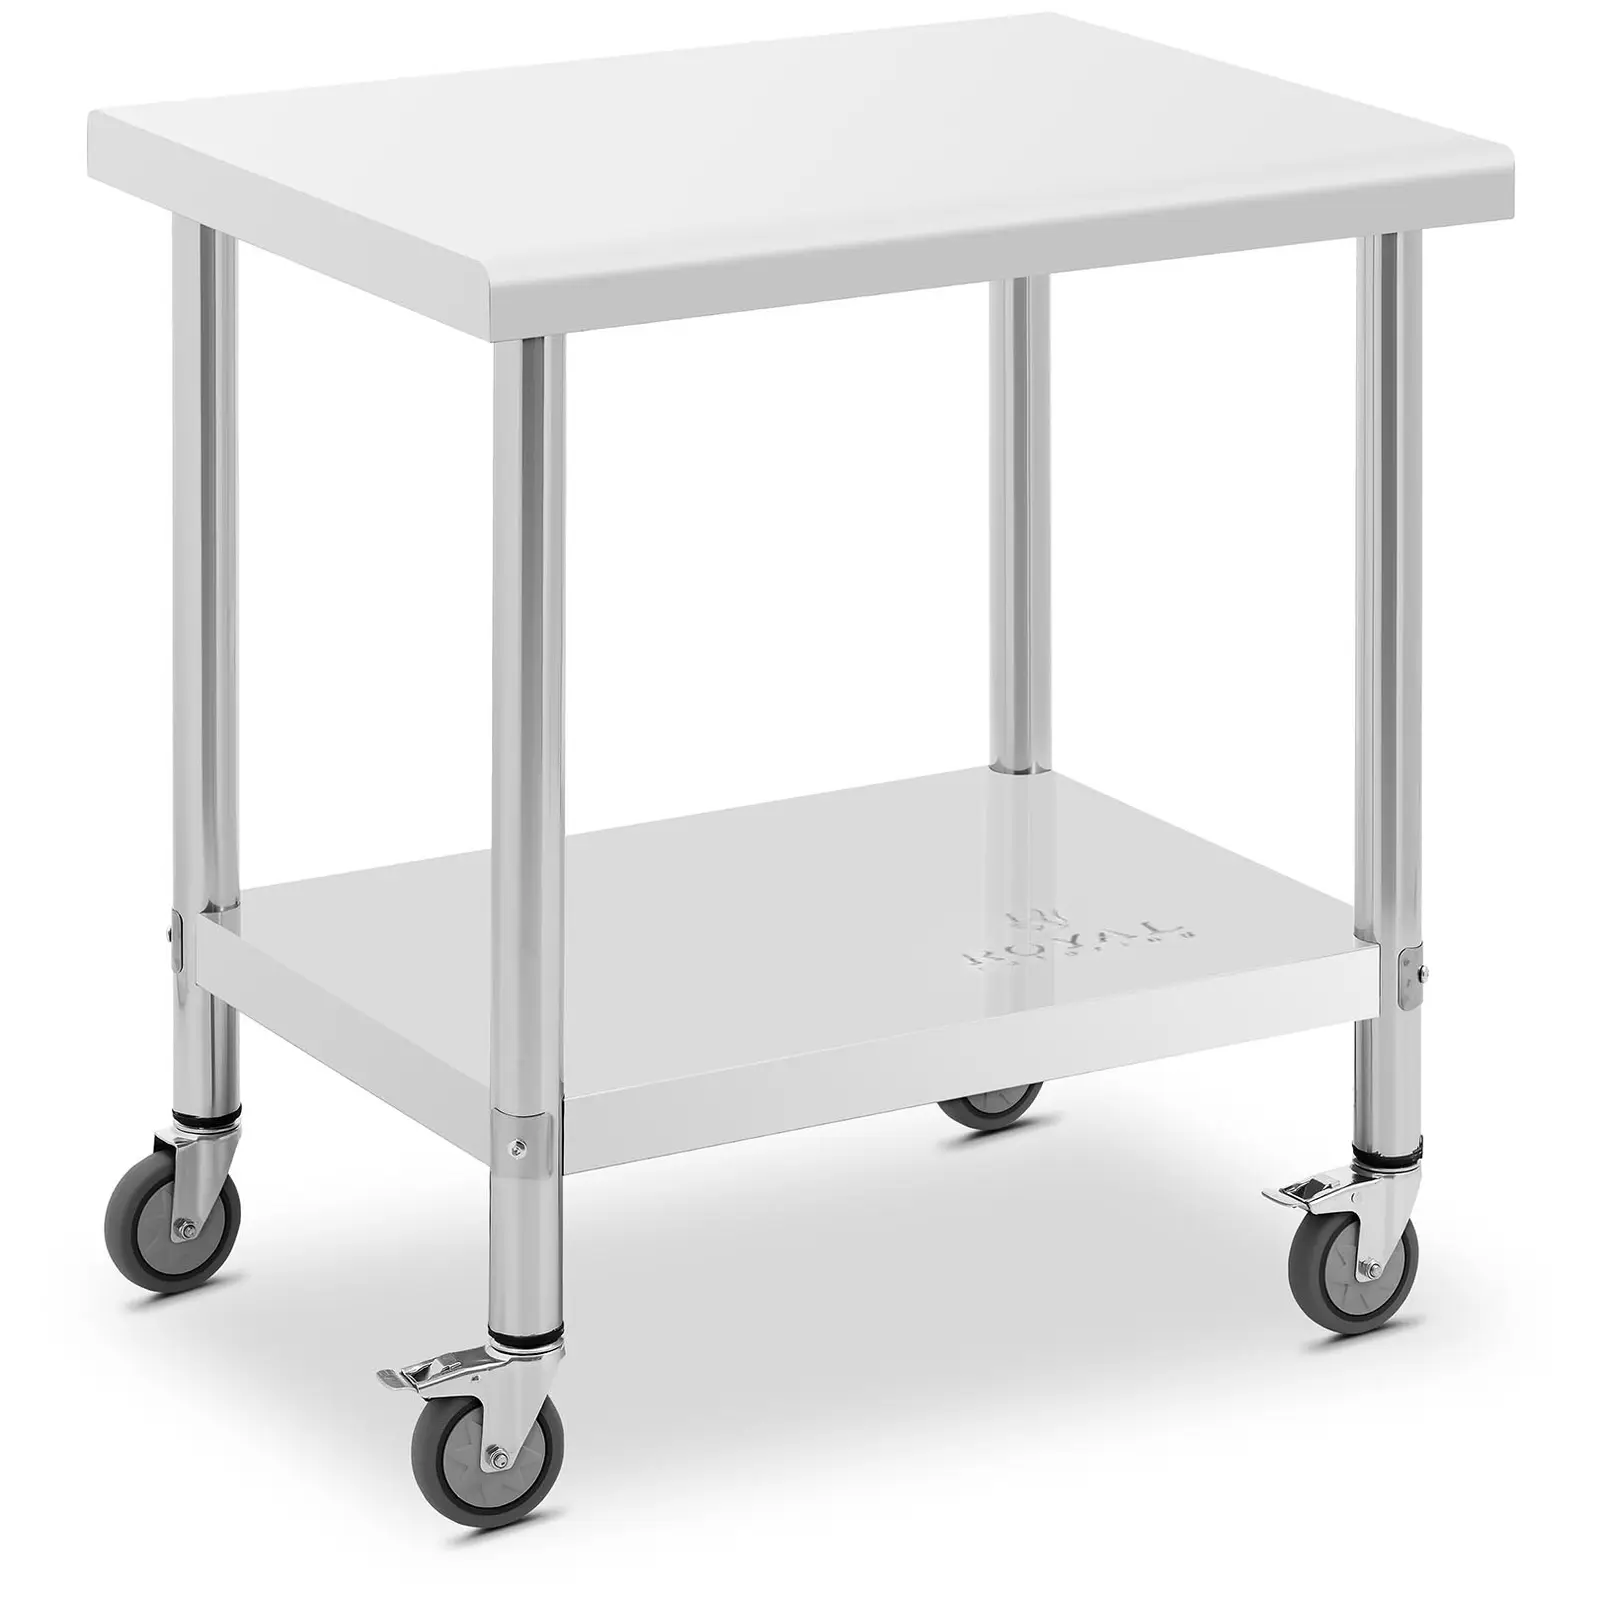 Wheeled work bench - 60 x 80 cm - 135 kg load capacity - Royal Catering